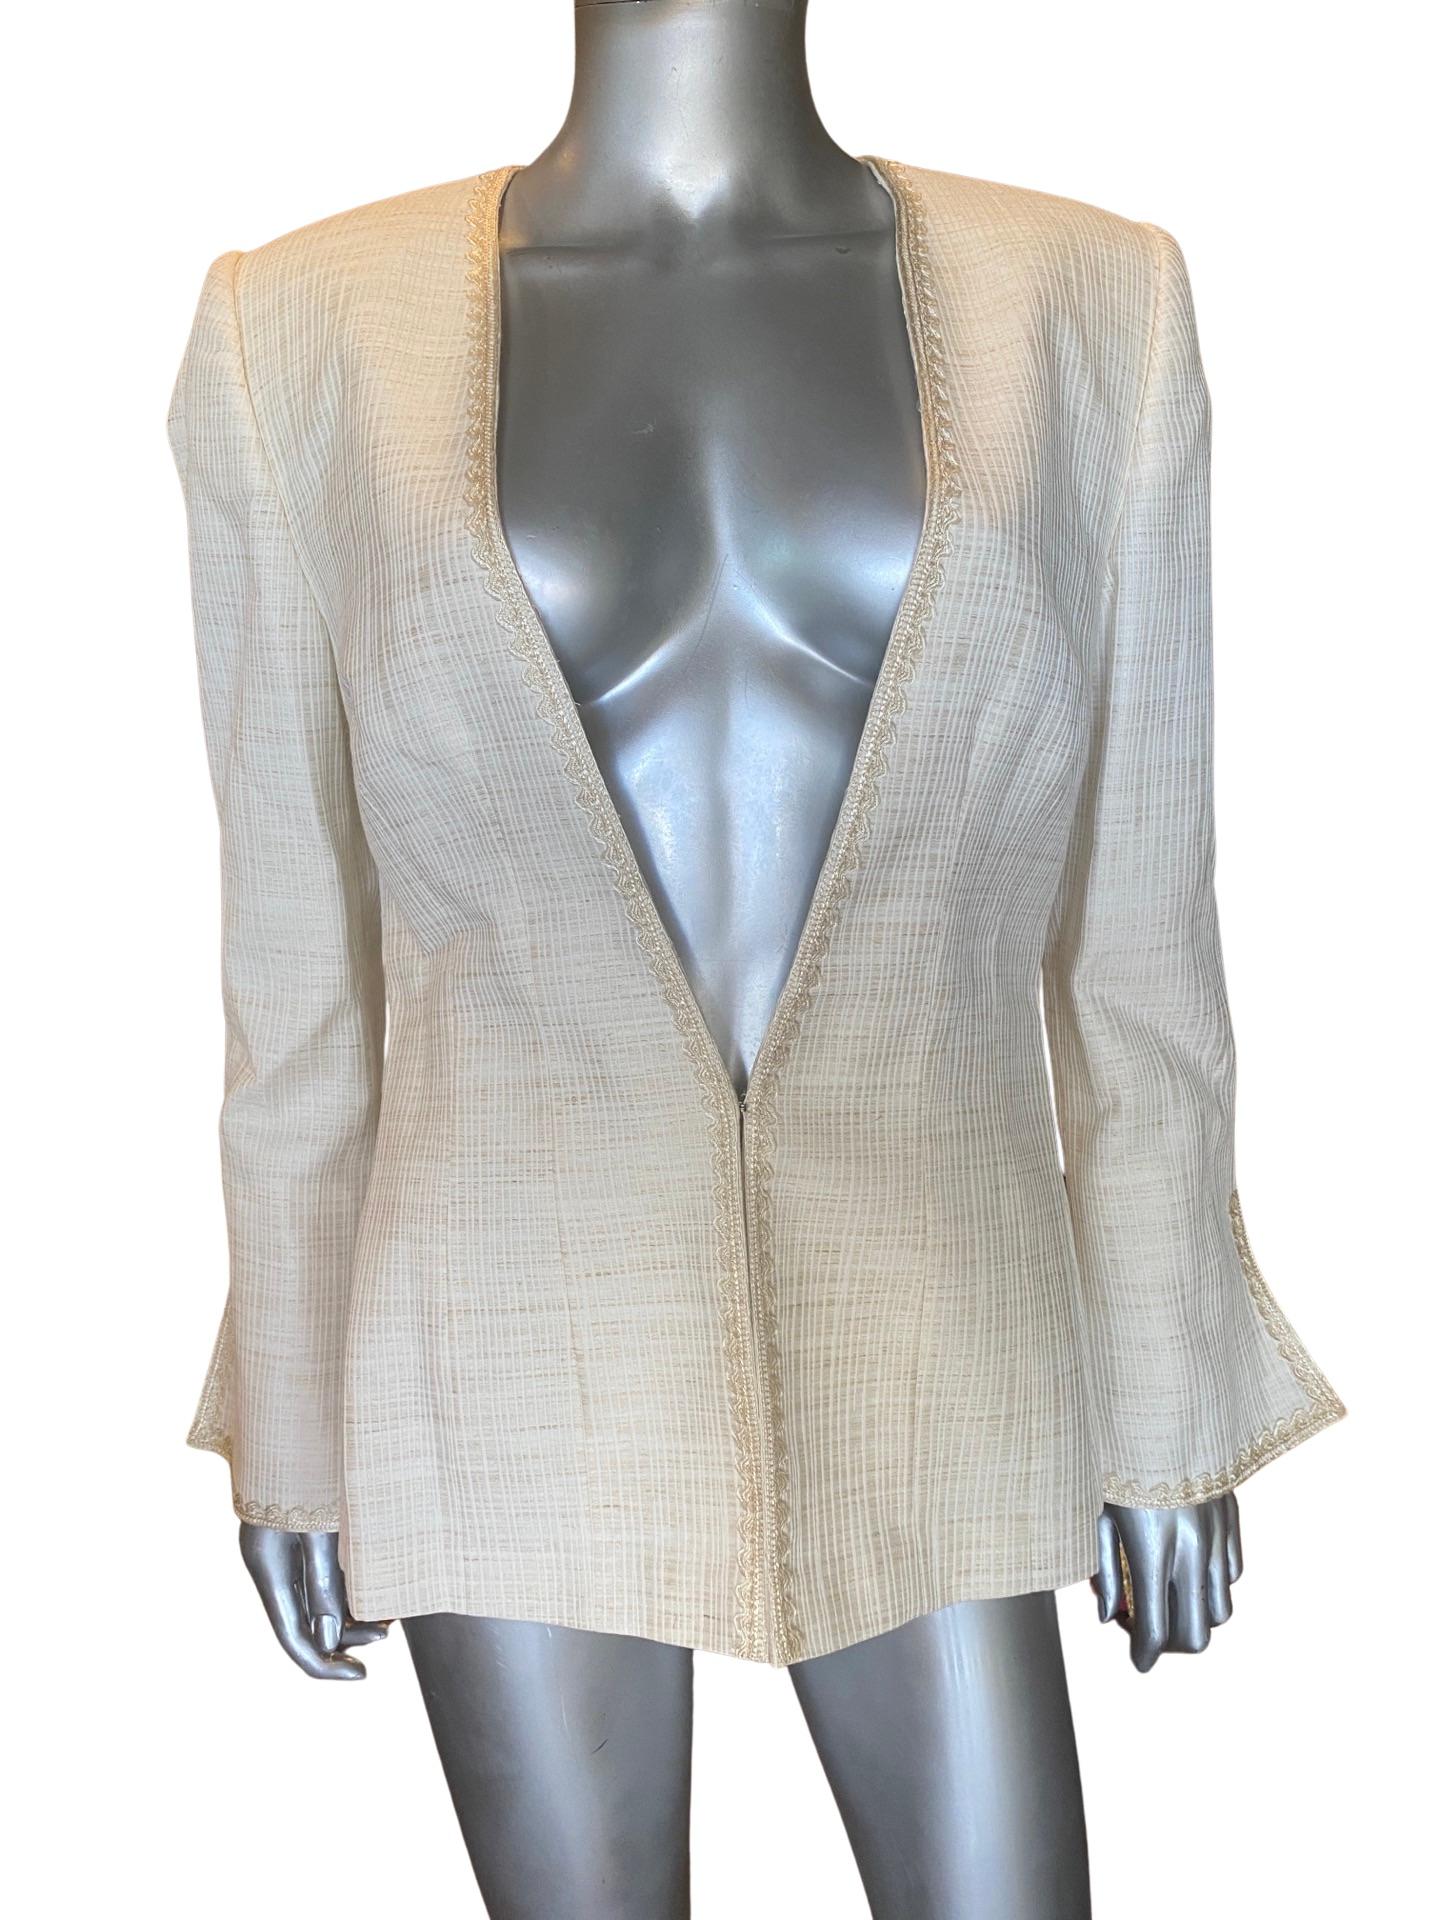 Fe Zandi Chic Custom Made Embroidered Linen Blend Jacket Size 12 For Sale 3